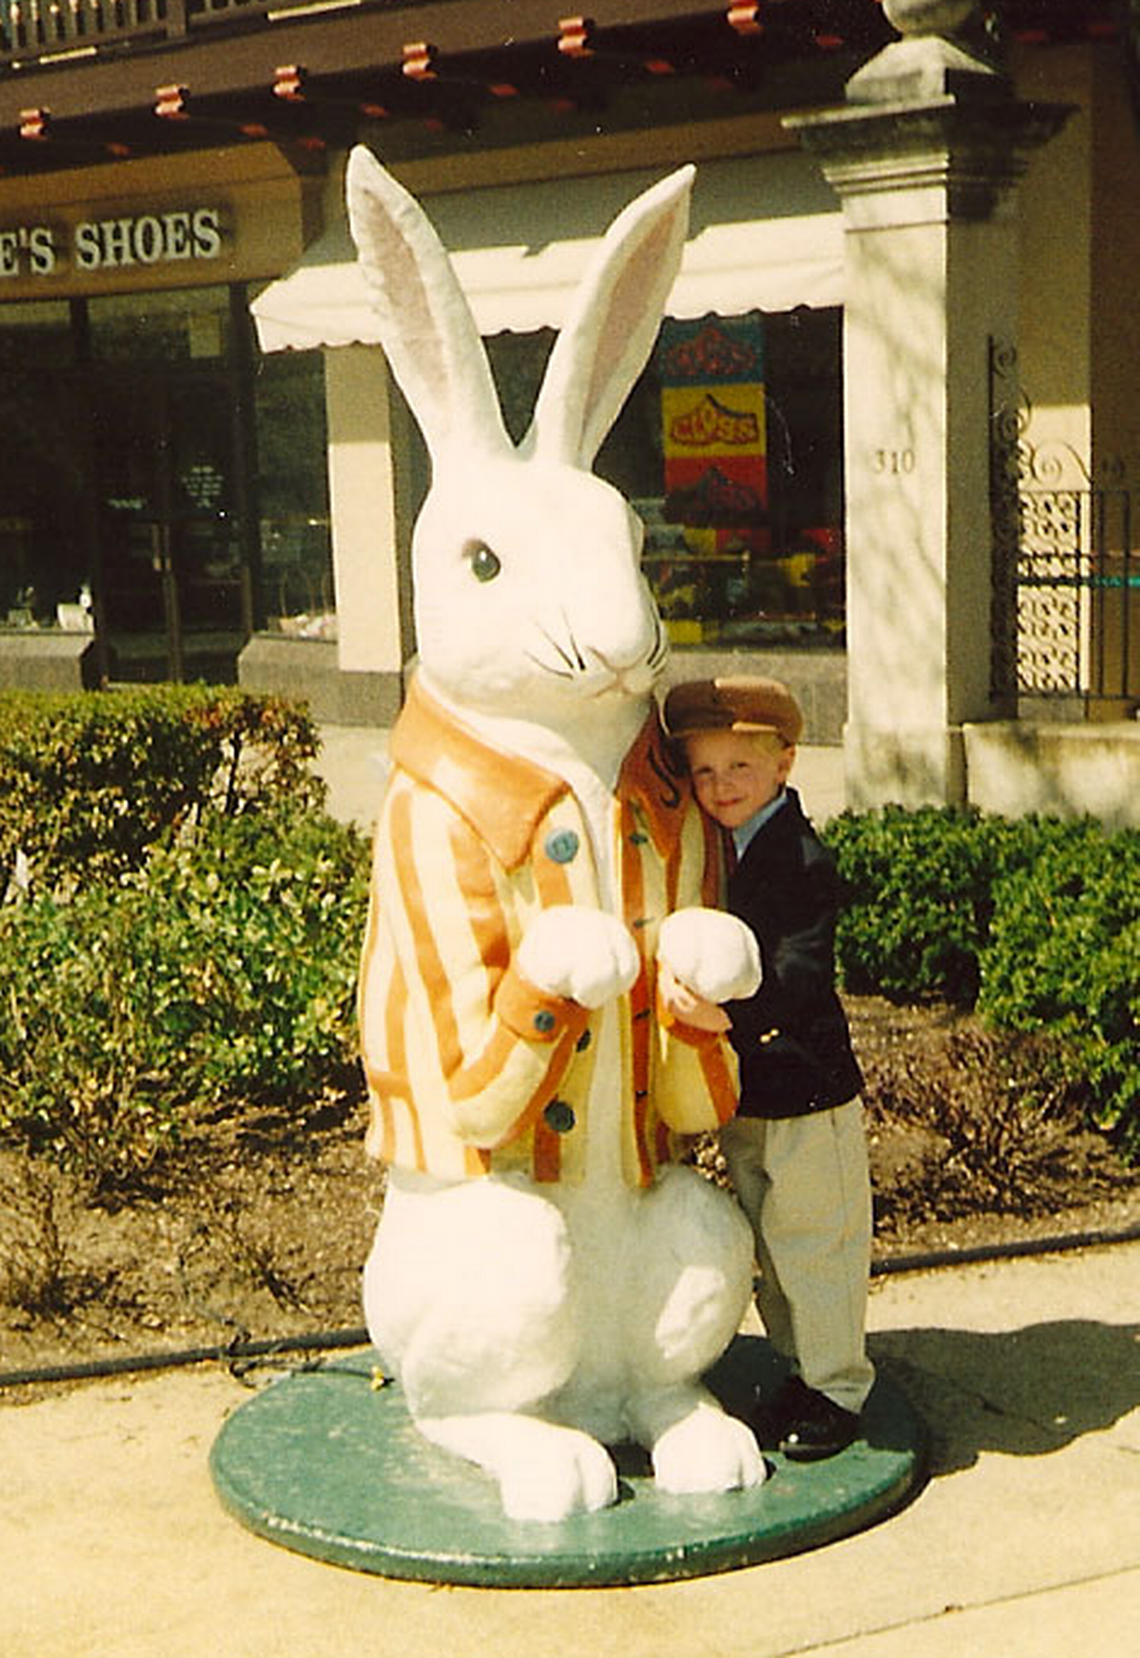 Joe, the now-missing Plaza Bunny, is captured in an old family photograph of Ian Johnson shared by Sheree Johnson of Kansas City on her blog, The Do’s and Don’ts of Aunting, April 3, 2011. Johnson’s nephew, Ian, poses next to the bunny before he disappeared in the late 1990s. Joe’s whereabouts are still unknown. Sheree Johnson, The Do's and Don'ts of Aunting